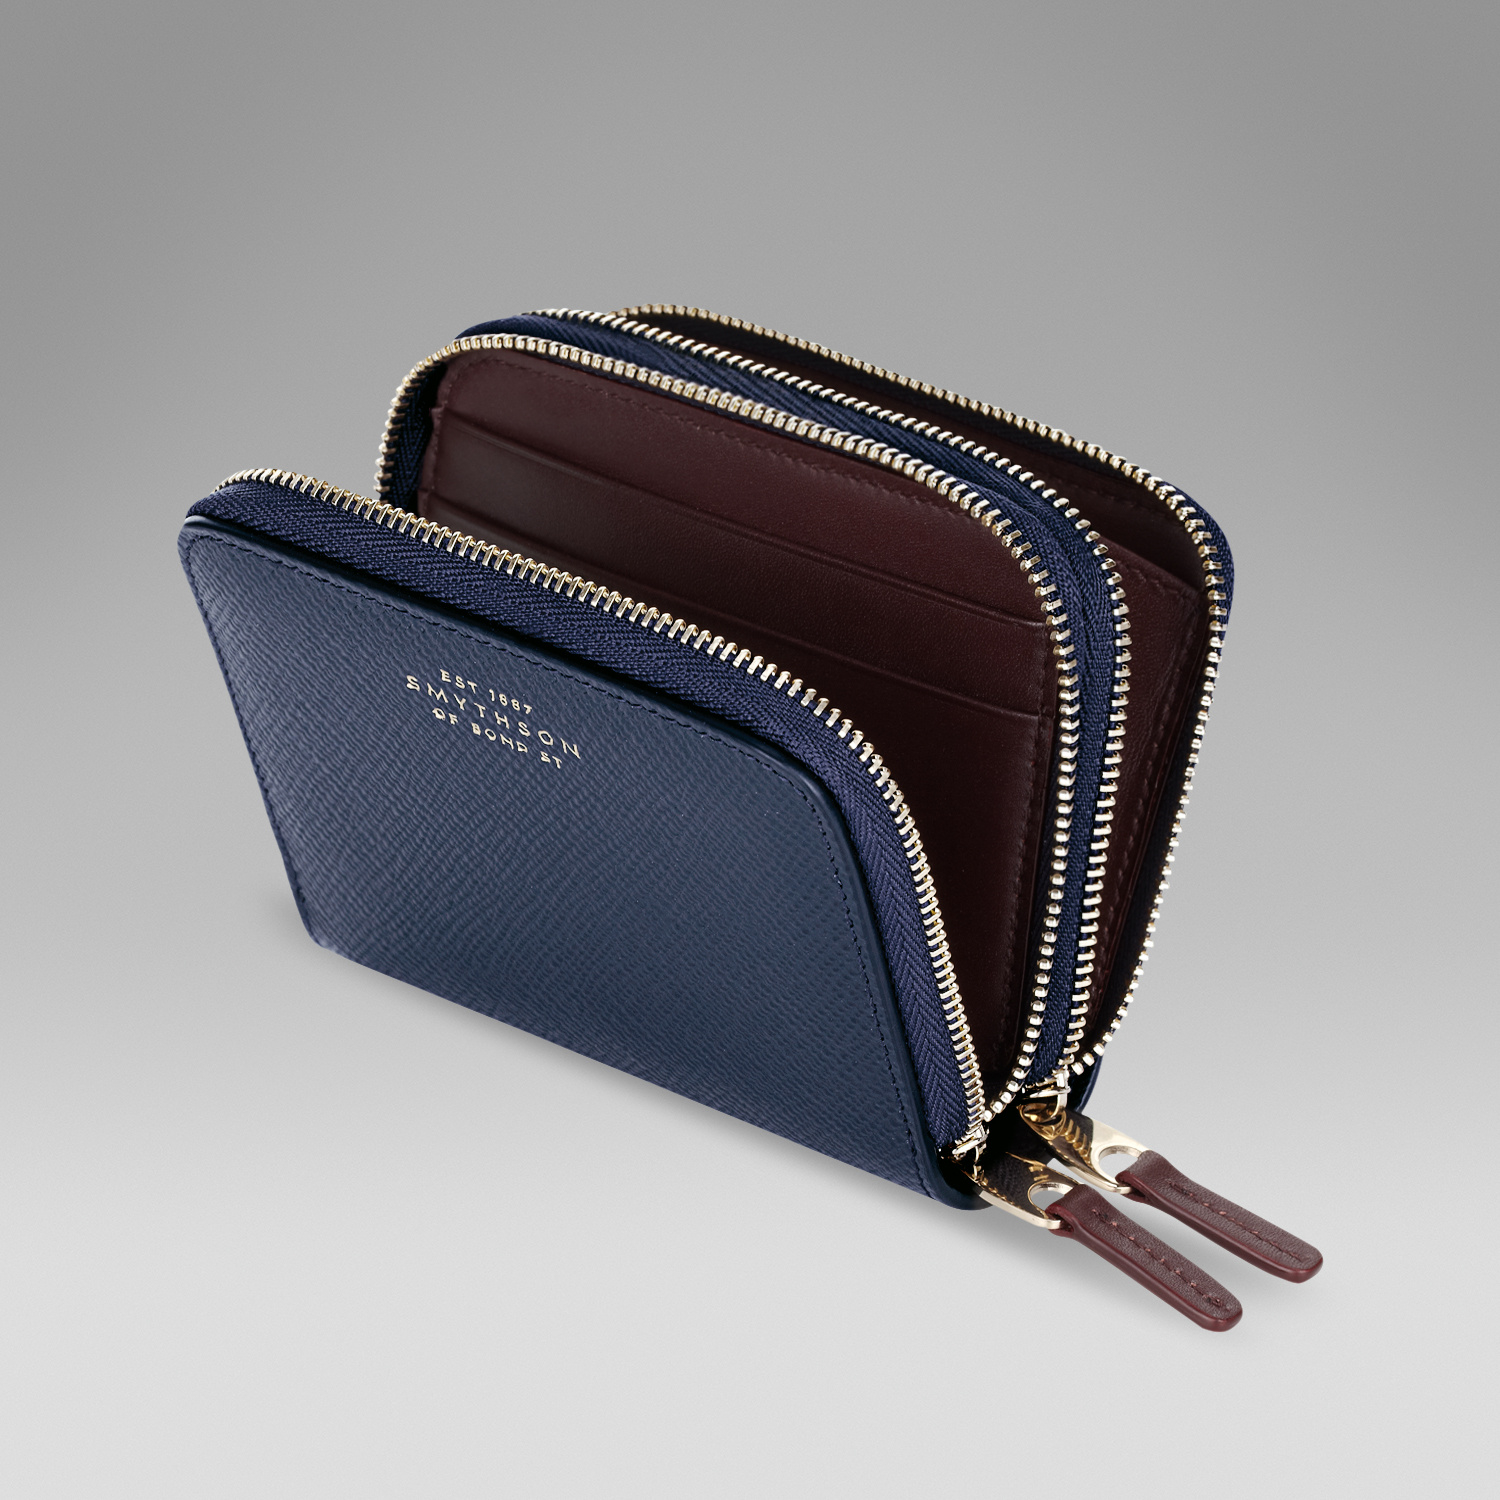 Smythson Leather Double Zip Coin Purse in Navy (Blue) - Lyst